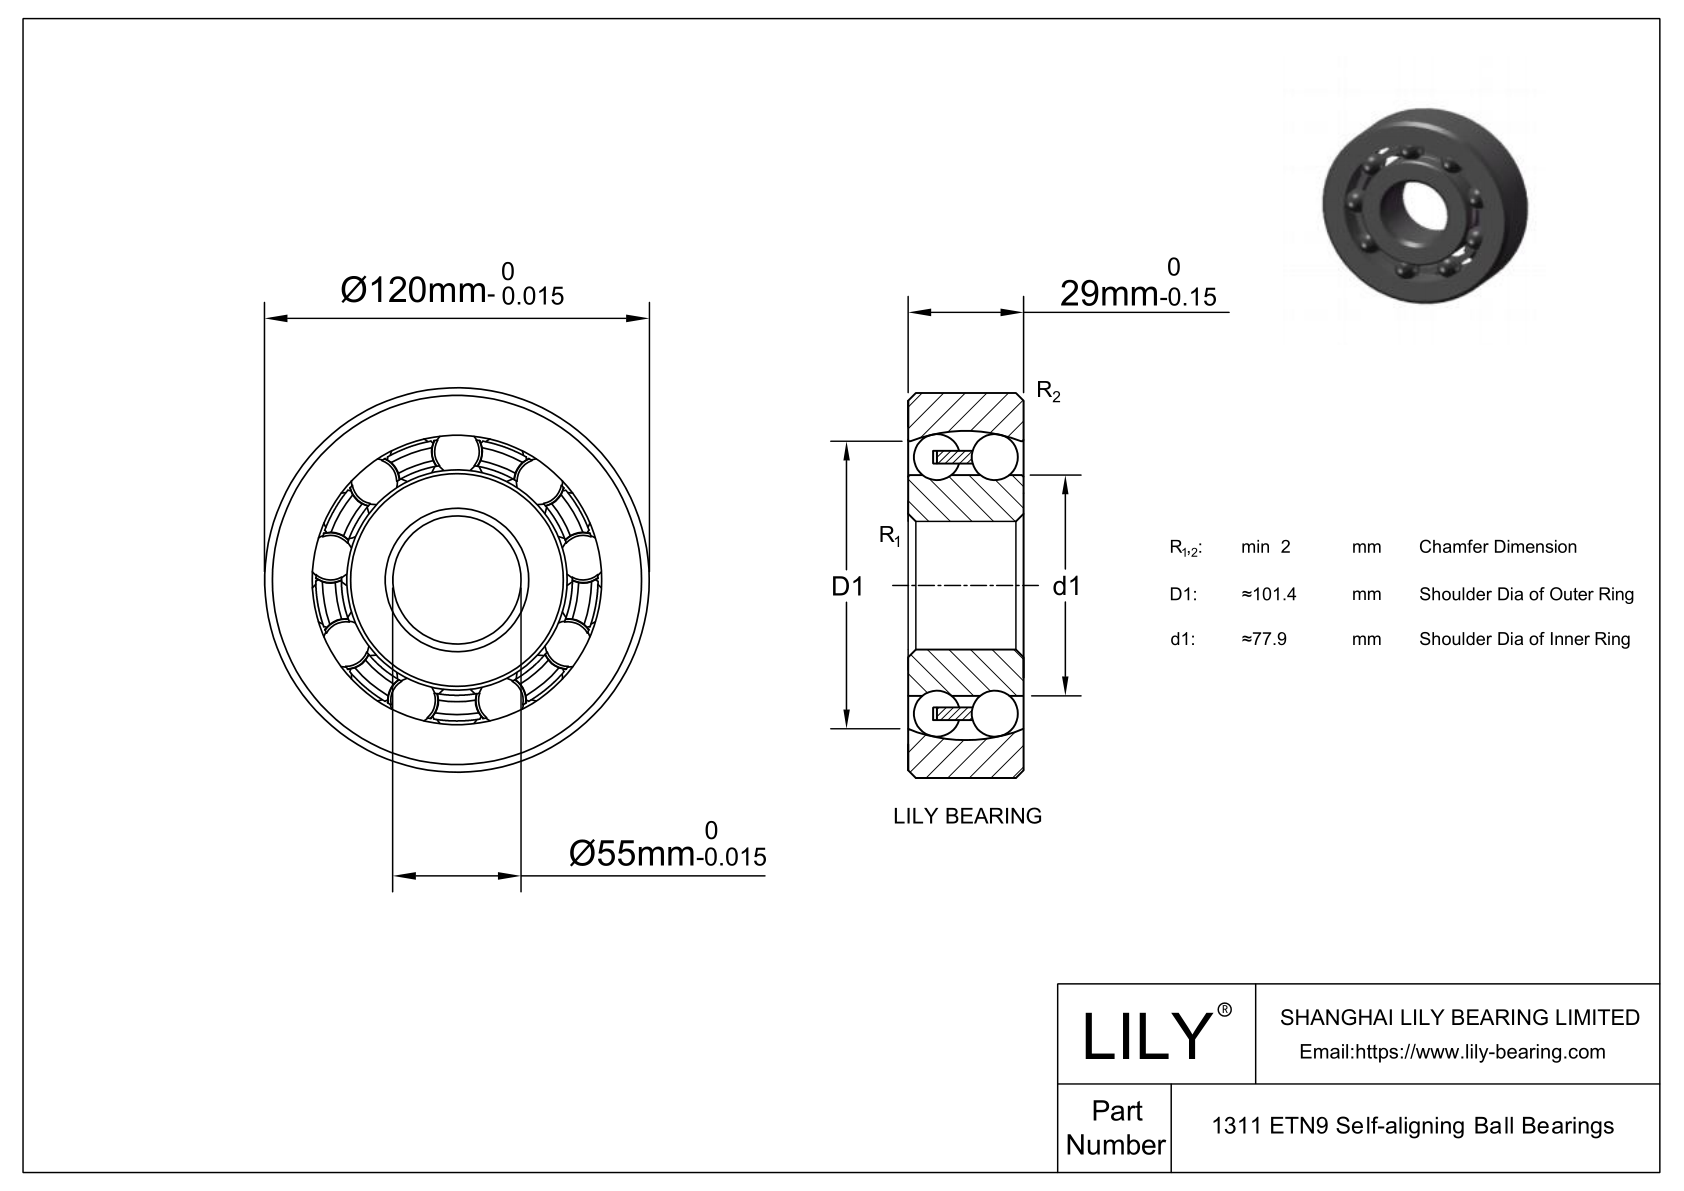 S1311 ETN9 Stainless Steel Self Aligning Ball Bearings cad drawing